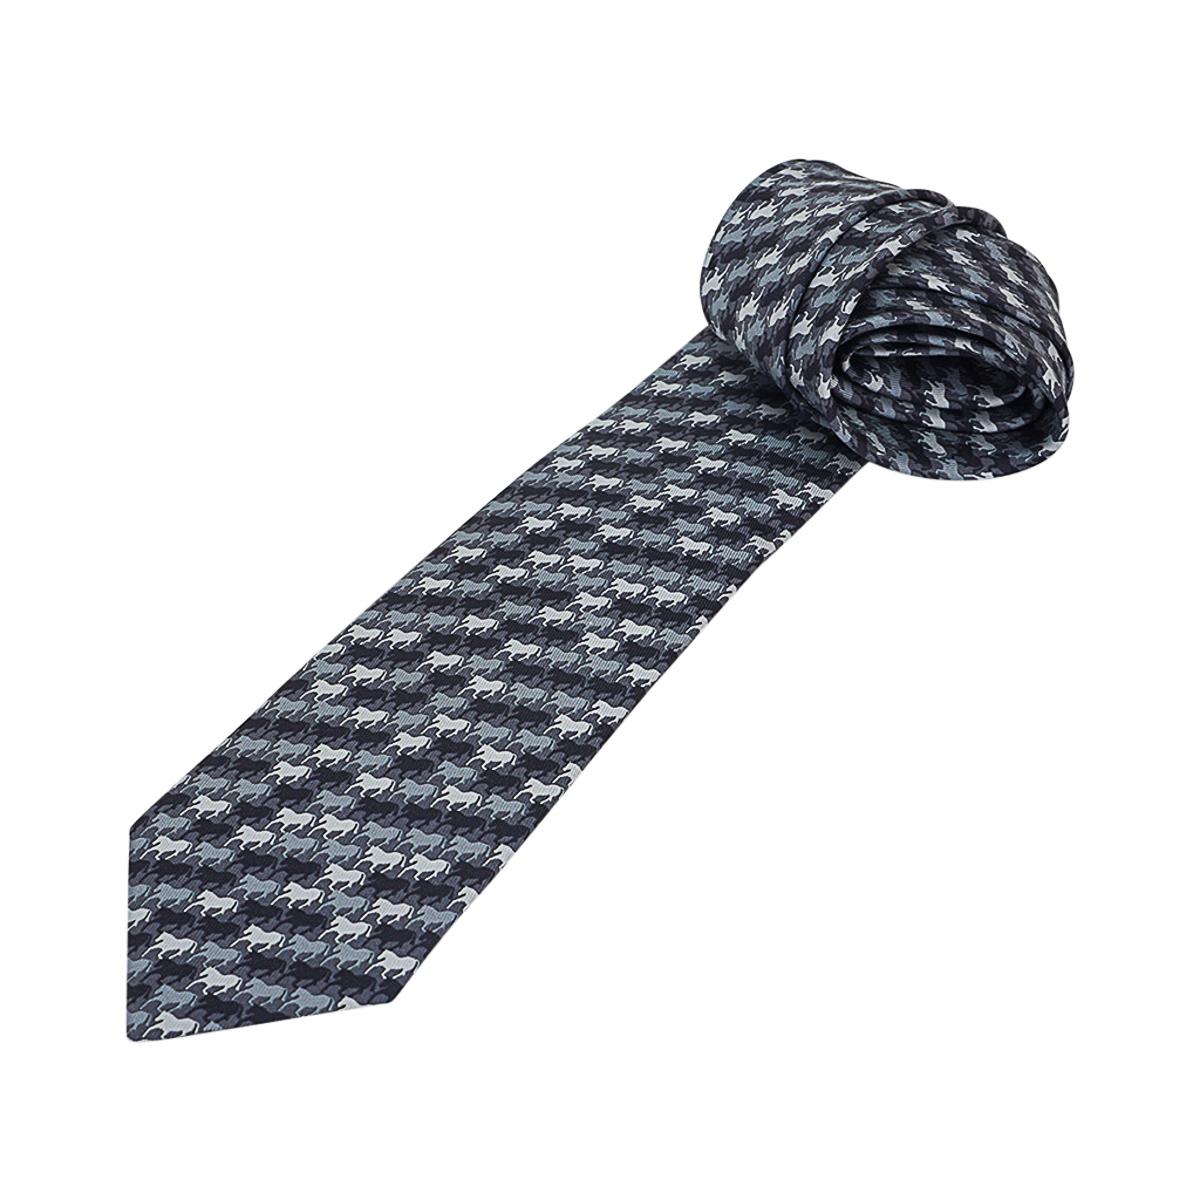 Mightychic offers an Hermes Parade Tie 7 featured in Gris Fonce, Anthracite and Gris Claire colorway.
A beautiful parade of horses executed  in subtle effect.
Hand-sewn silk twill.
Equestrian motif - classic Hermes!
Made in France.
NEW or NEVER